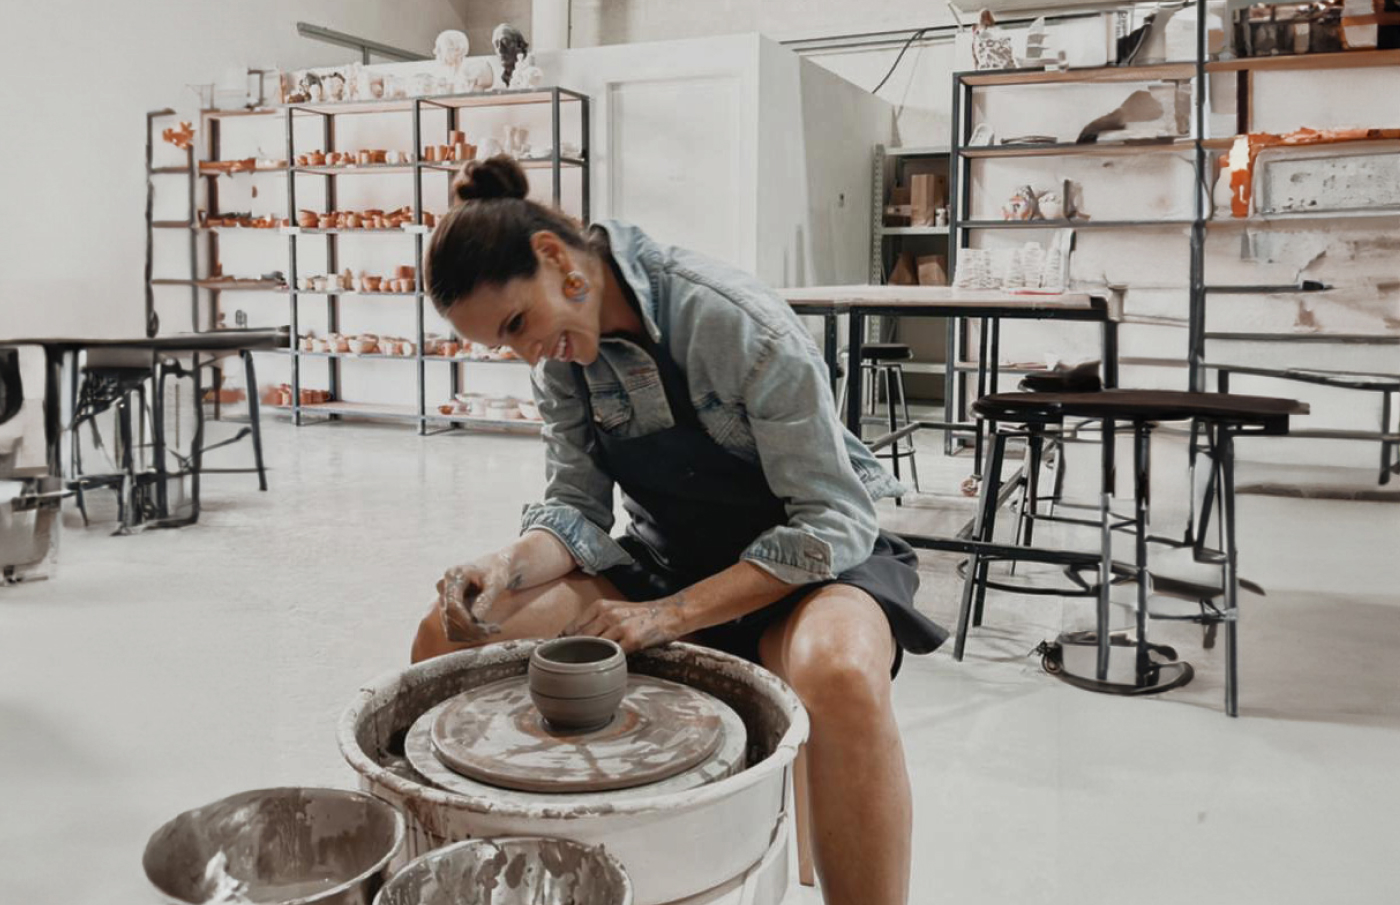 Chiara in a ceramics and pottery studio, laughing while shaping clay with her hands.